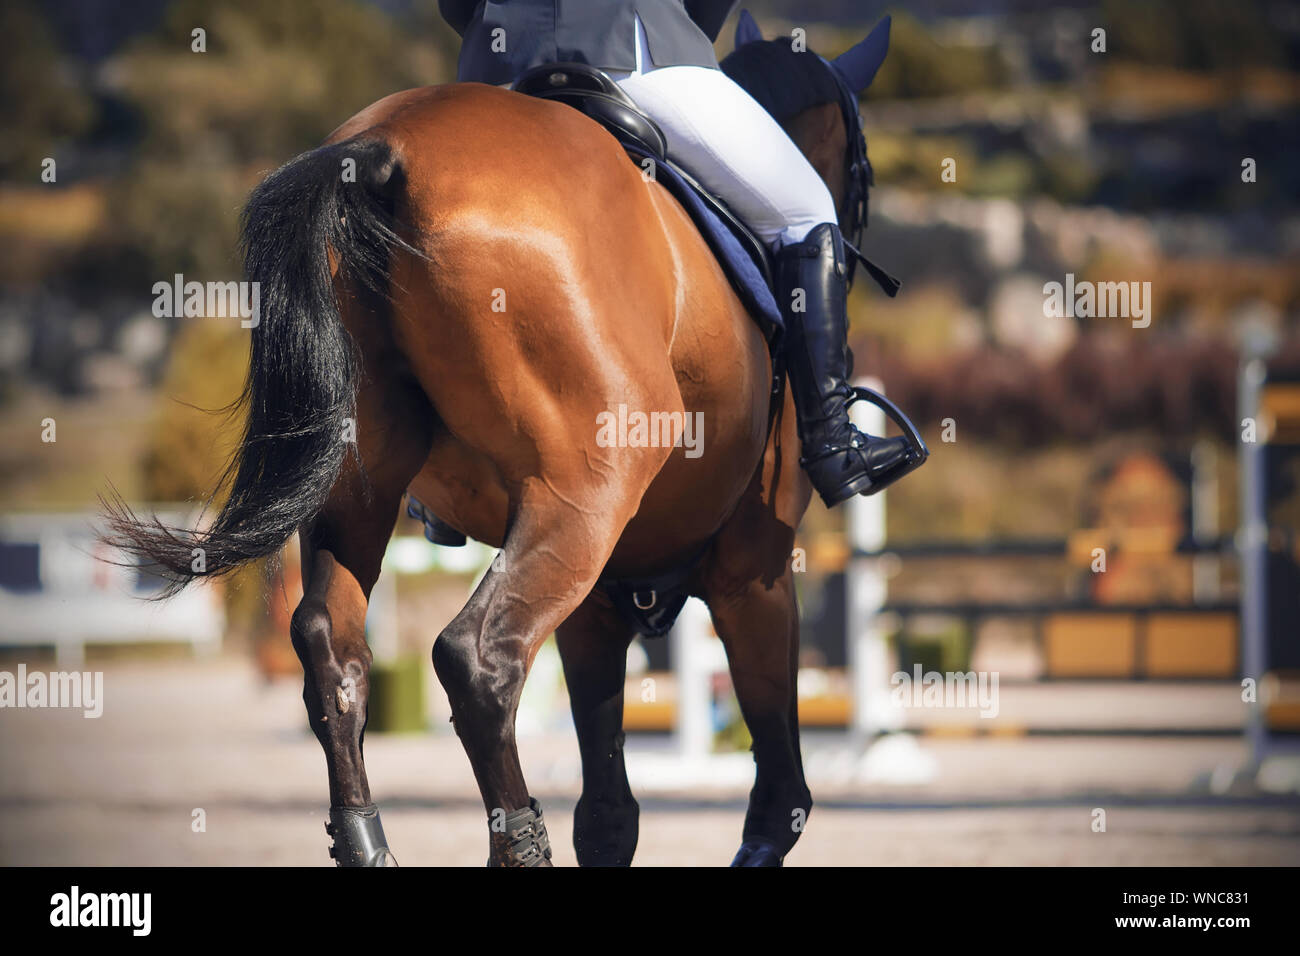 The tail of a sleek Bay horse with a rider in the saddle, galloping away across the sandy arena. Stock Photo